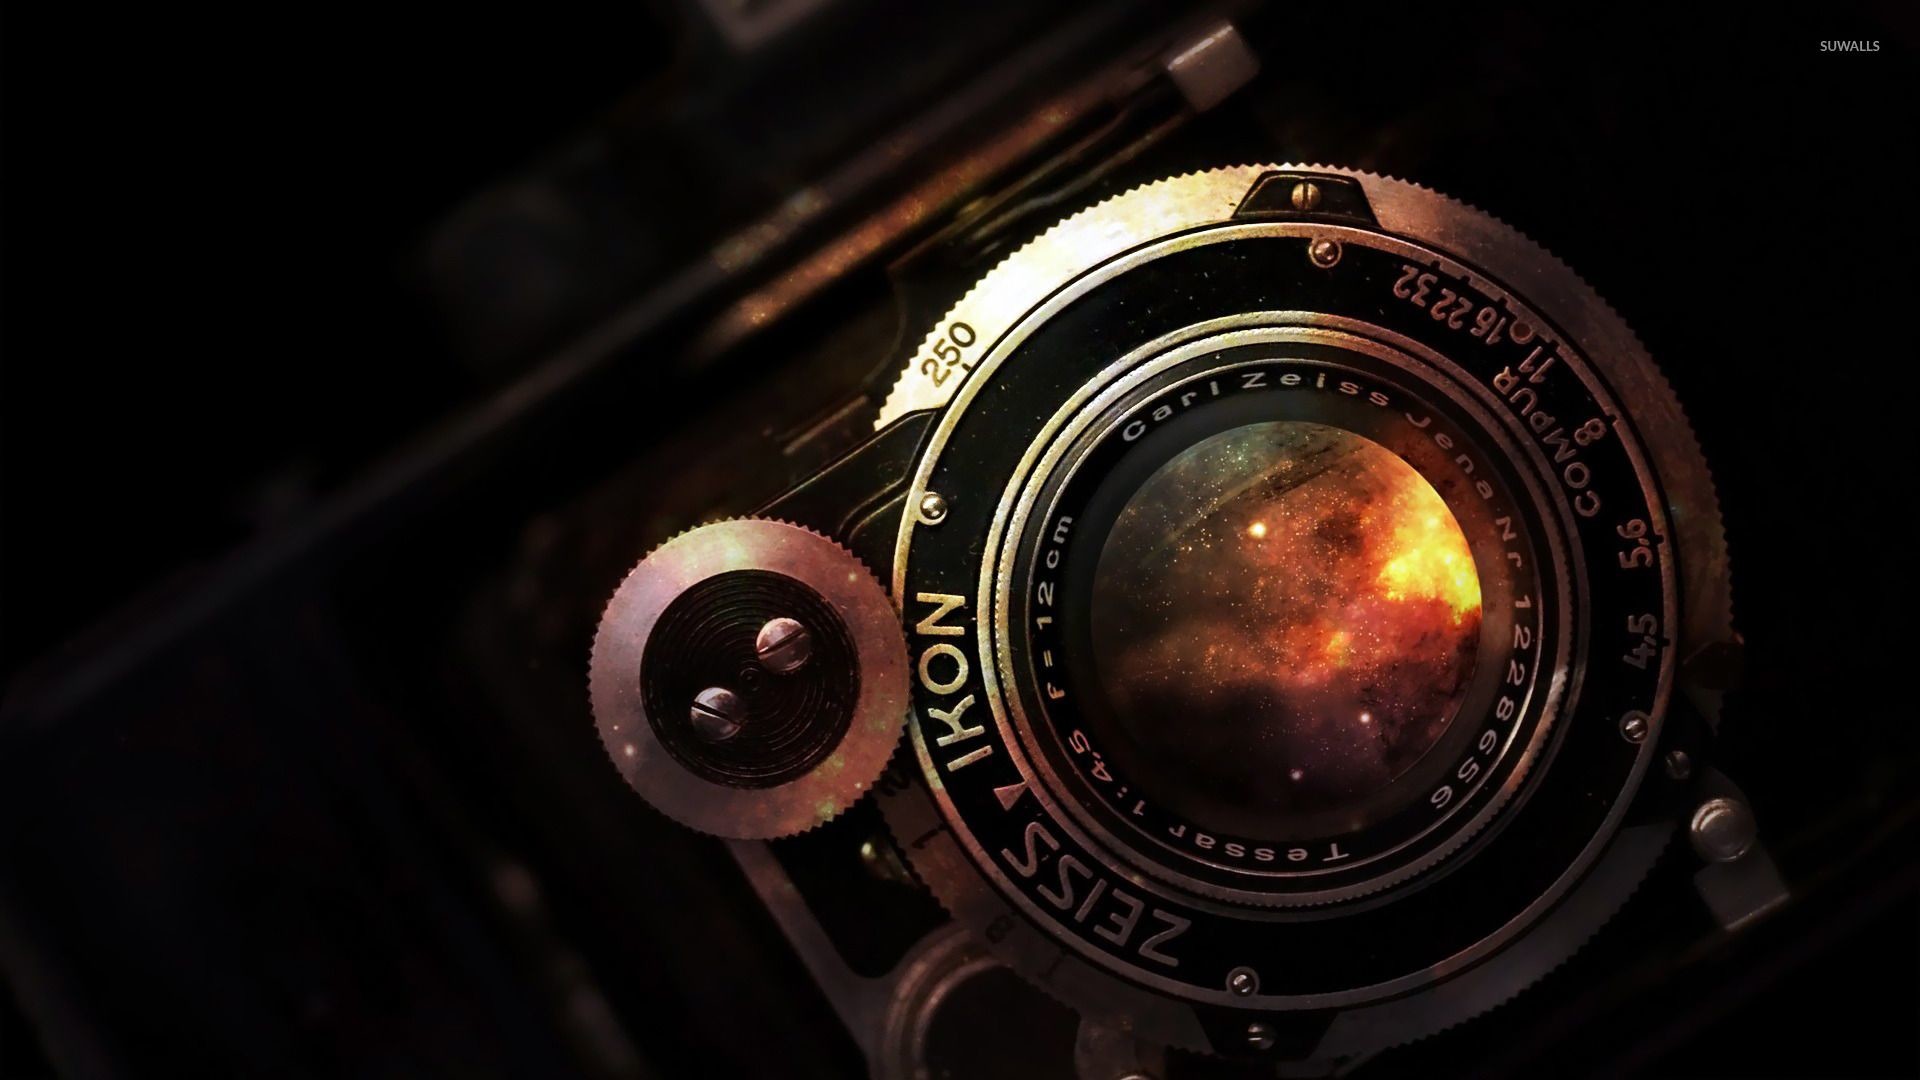 1920x1080  Vintage Camera Photography HD wallpaper | HD Latest Wallpapers">